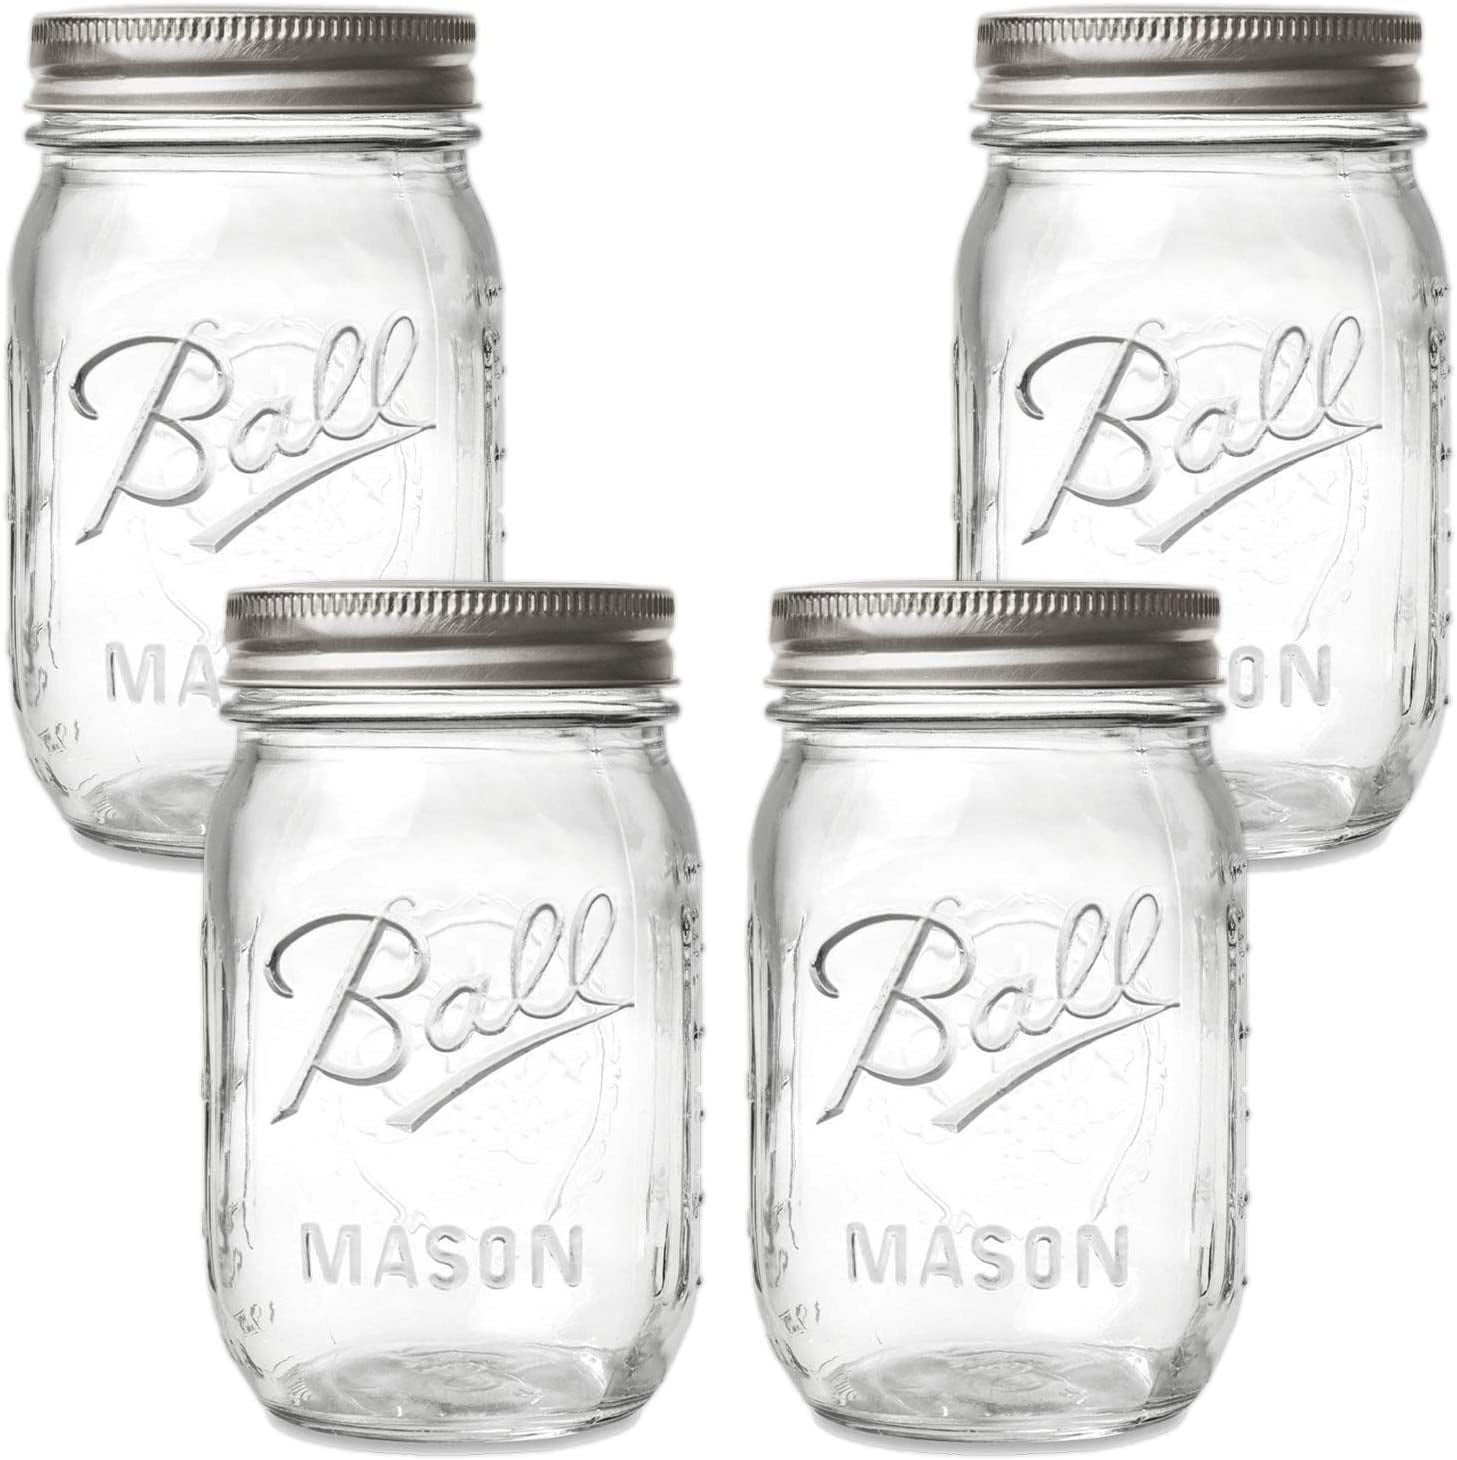 Newest Superb Version]EAXCK 16 oz Mason Jars with Lids and Bands 6  PACK,Wide Mouth